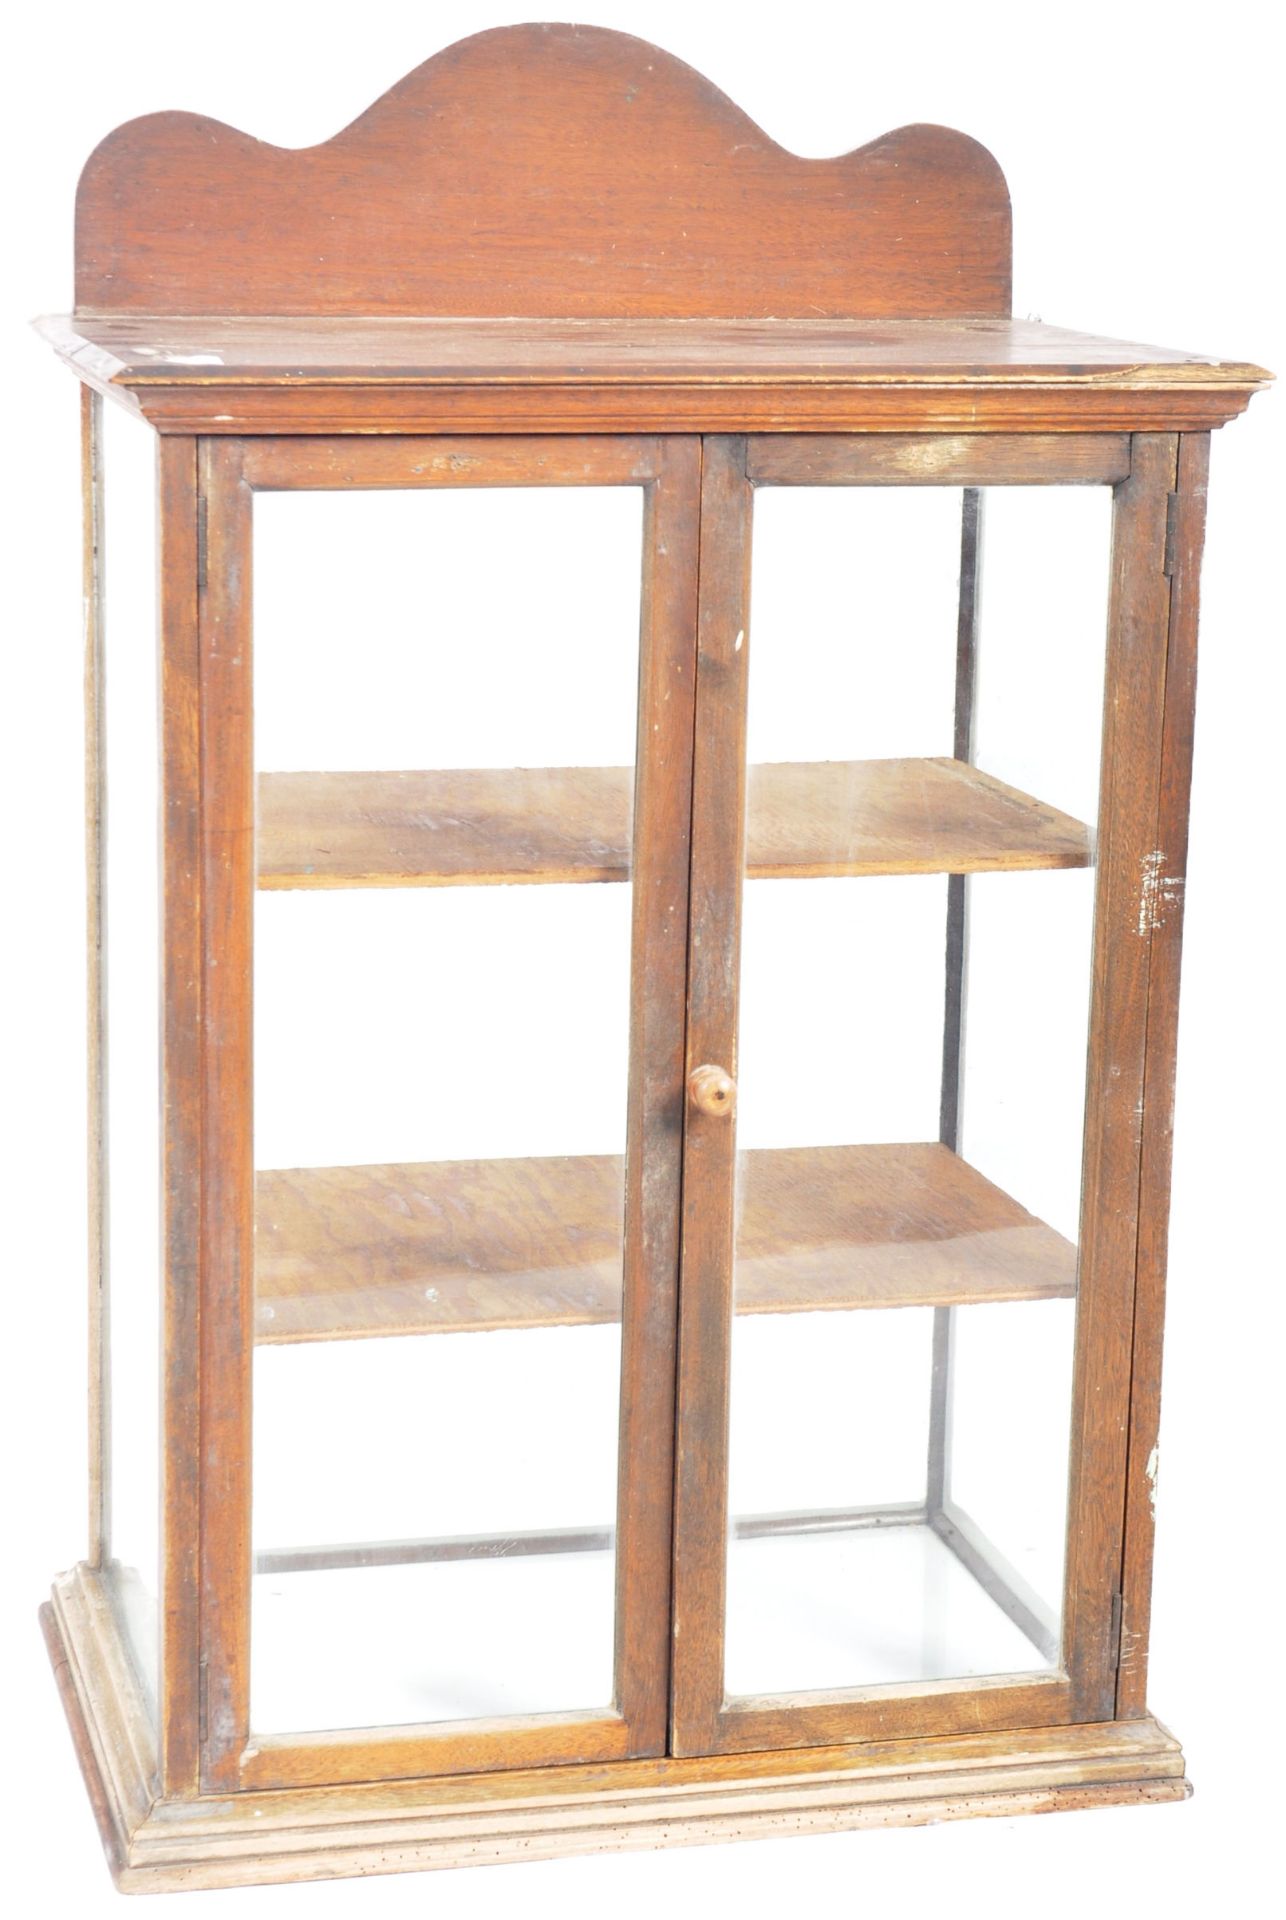 EARLY 20TH CENTURY COUNTER TOP SHOP DISPLAY CABINET